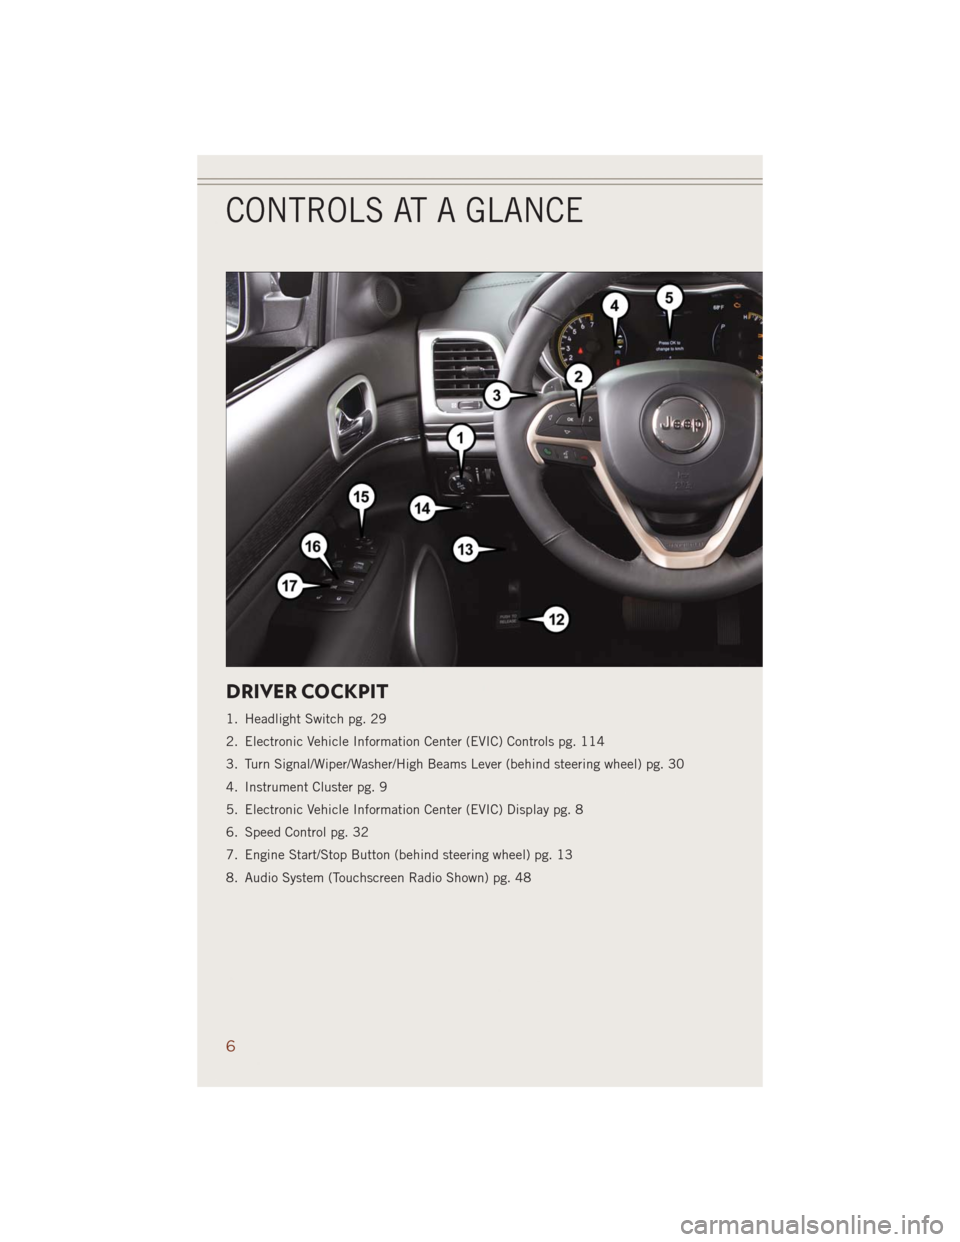 JEEP GRAND CHEROKEE 2014 WK2 / 4.G User Guide DRIVER COCKPIT
1. Headlight Switch pg. 29
2. Electronic Vehicle Information Center (EVIC) Controls pg. 114
3. Turn Signal/Wiper/Washer/High Beams Lever (behind steering wheel) pg. 30
4. Instrument Clu